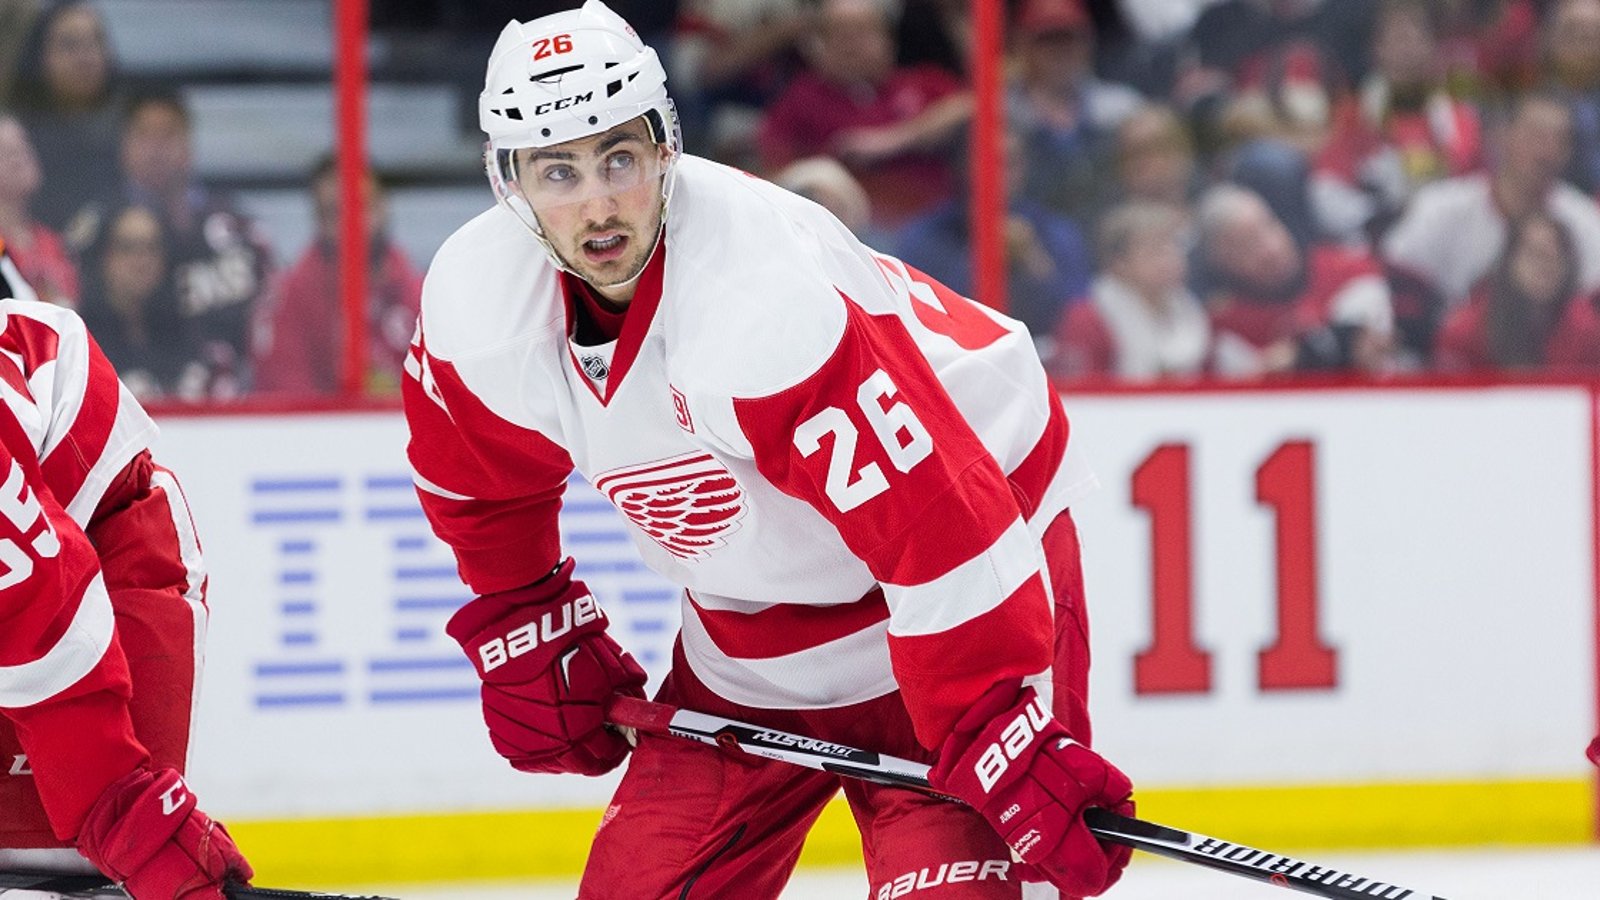 Former Red Wing now says he will bounce back from career ending injury.